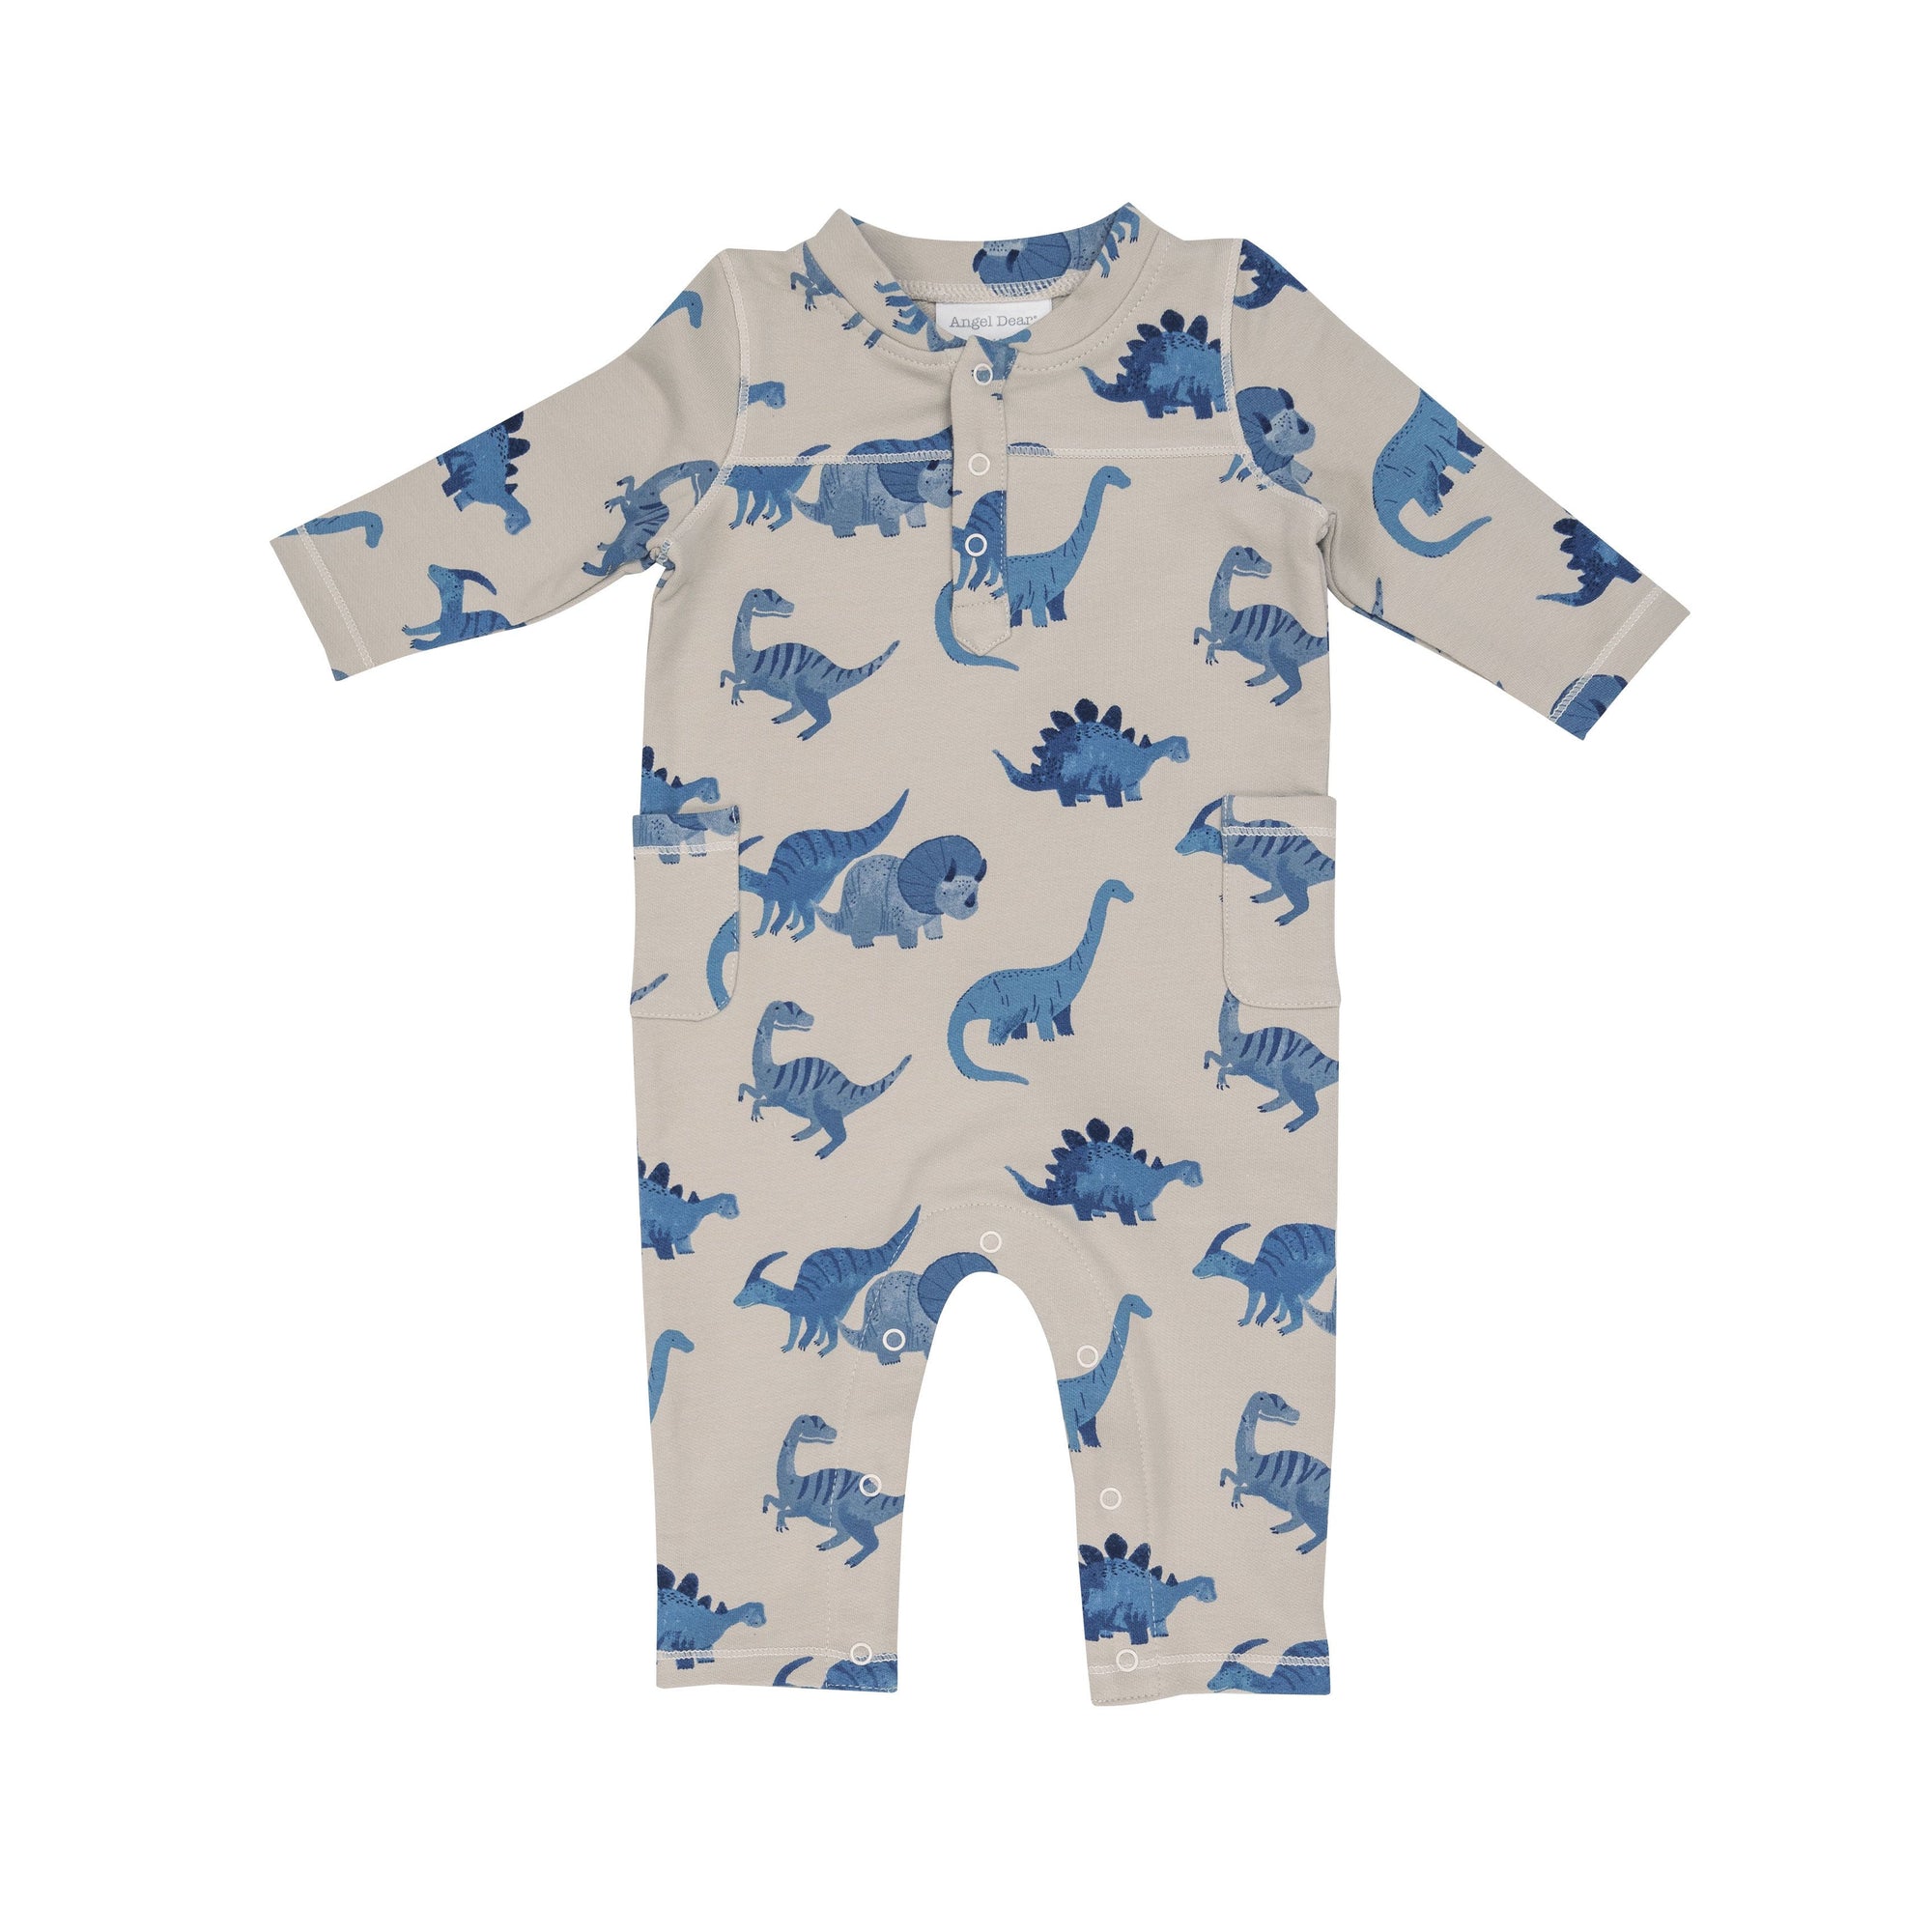 French Terry Baby Romper - Blue Dino